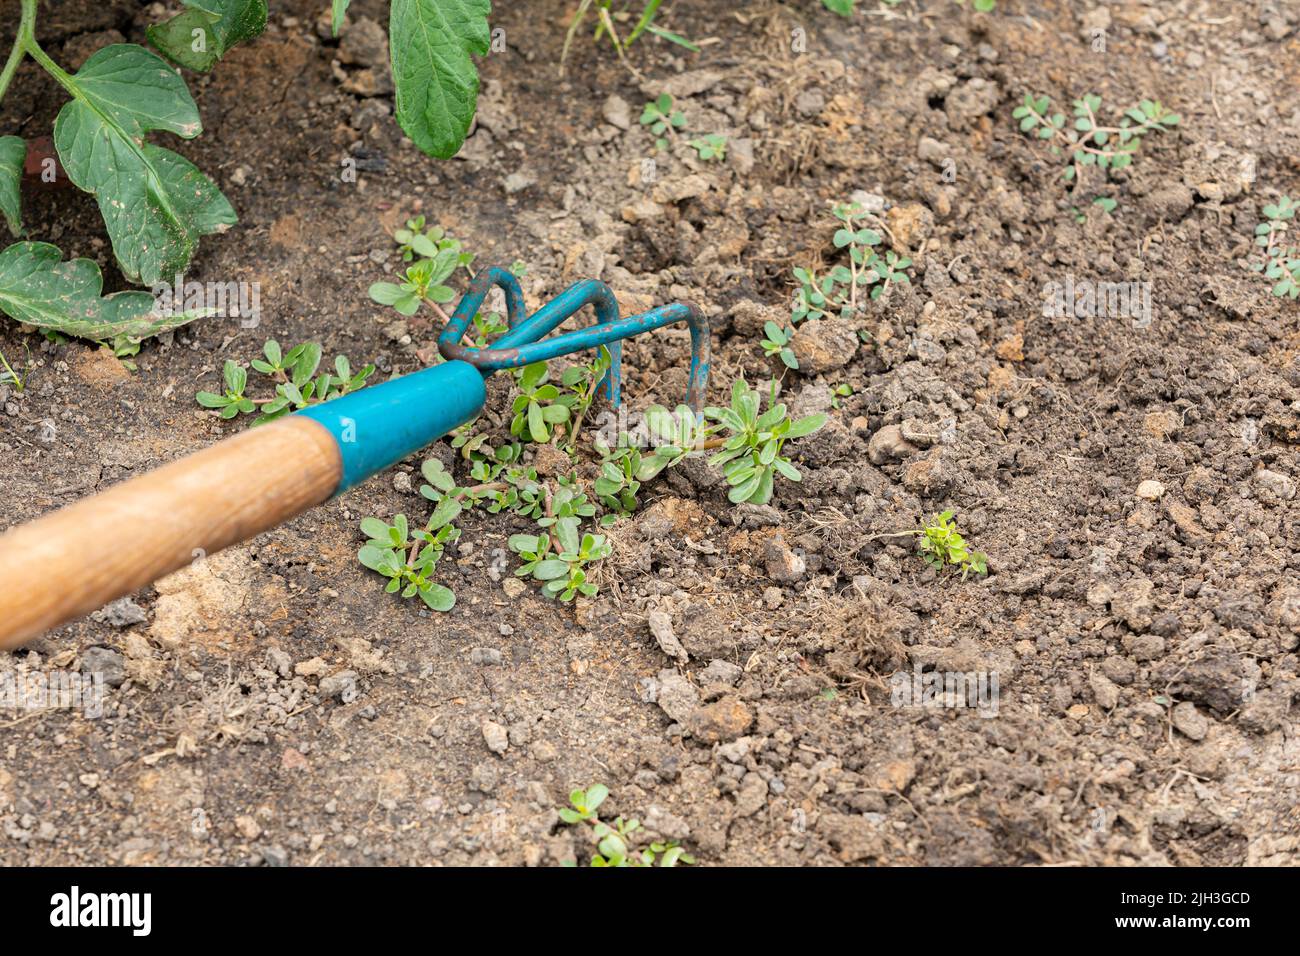 Removing weeds in garden with cultivator. Gardening, weeding, and working in garden concept. Stock Photo